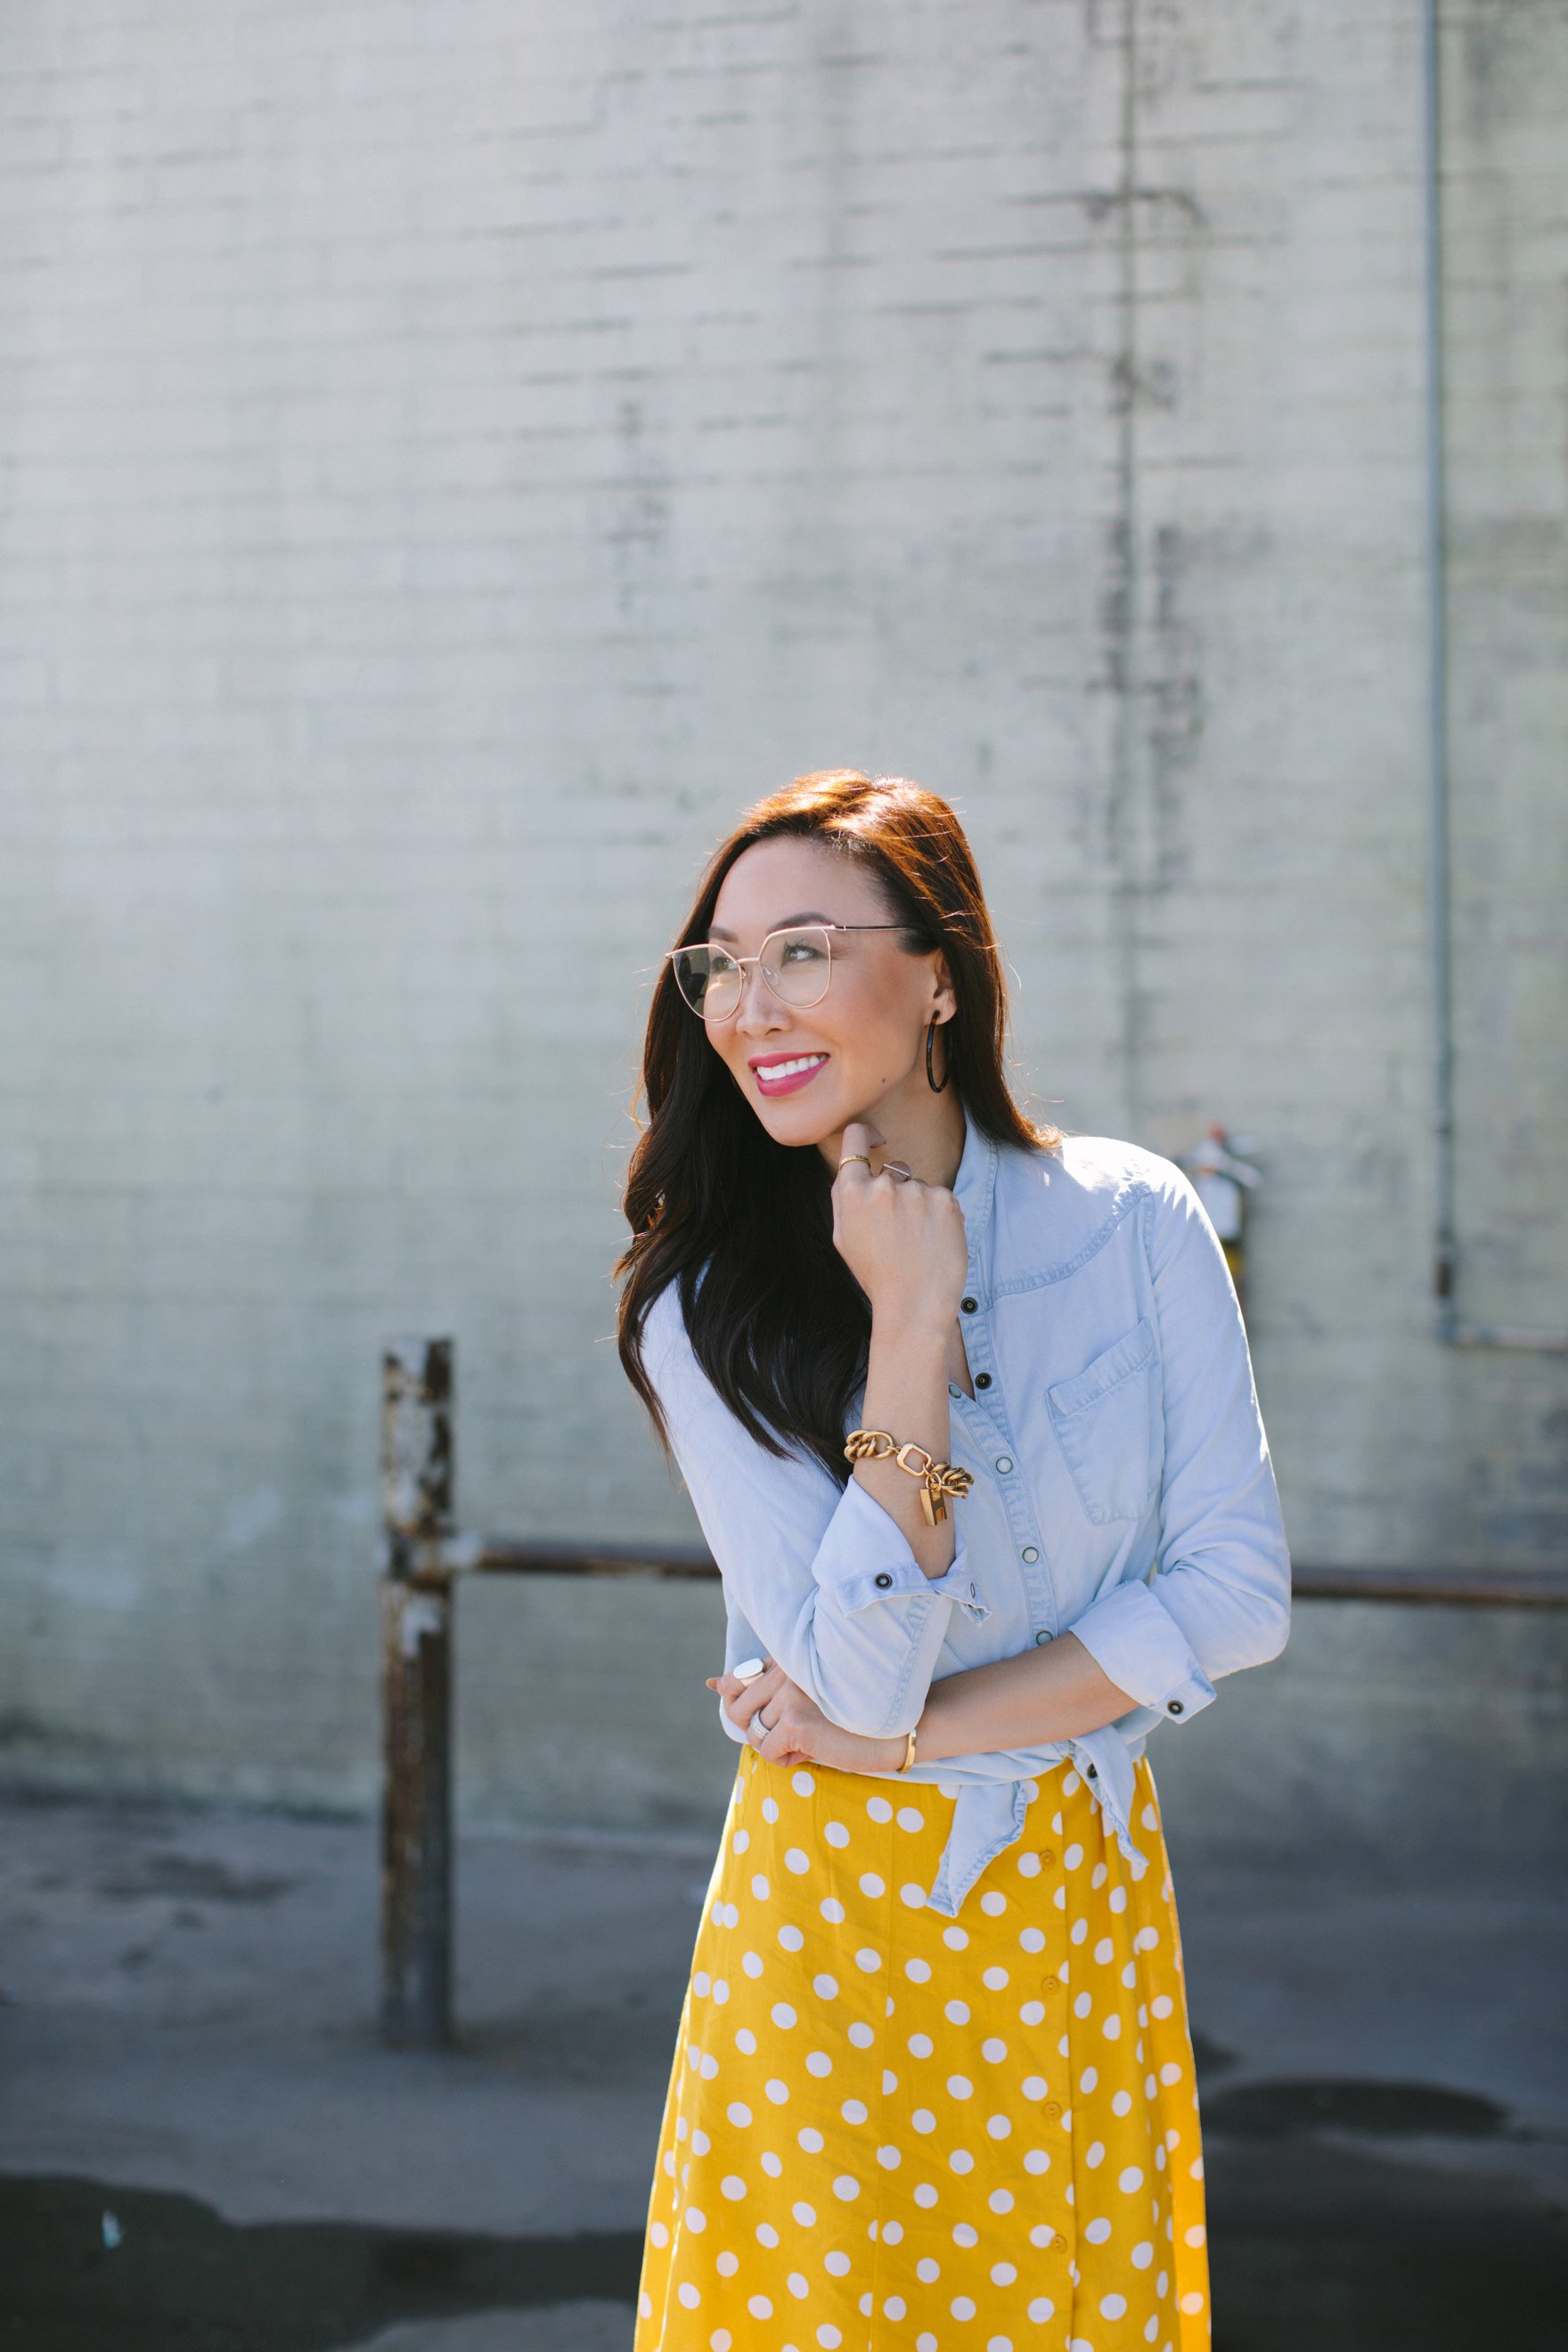 Yellow and white polka dot dress forever 21 paired with a chambray top featuring India hicks bracelet and other jewels lifestyle blogger Diana Elizabeth also wearing clear sunglases